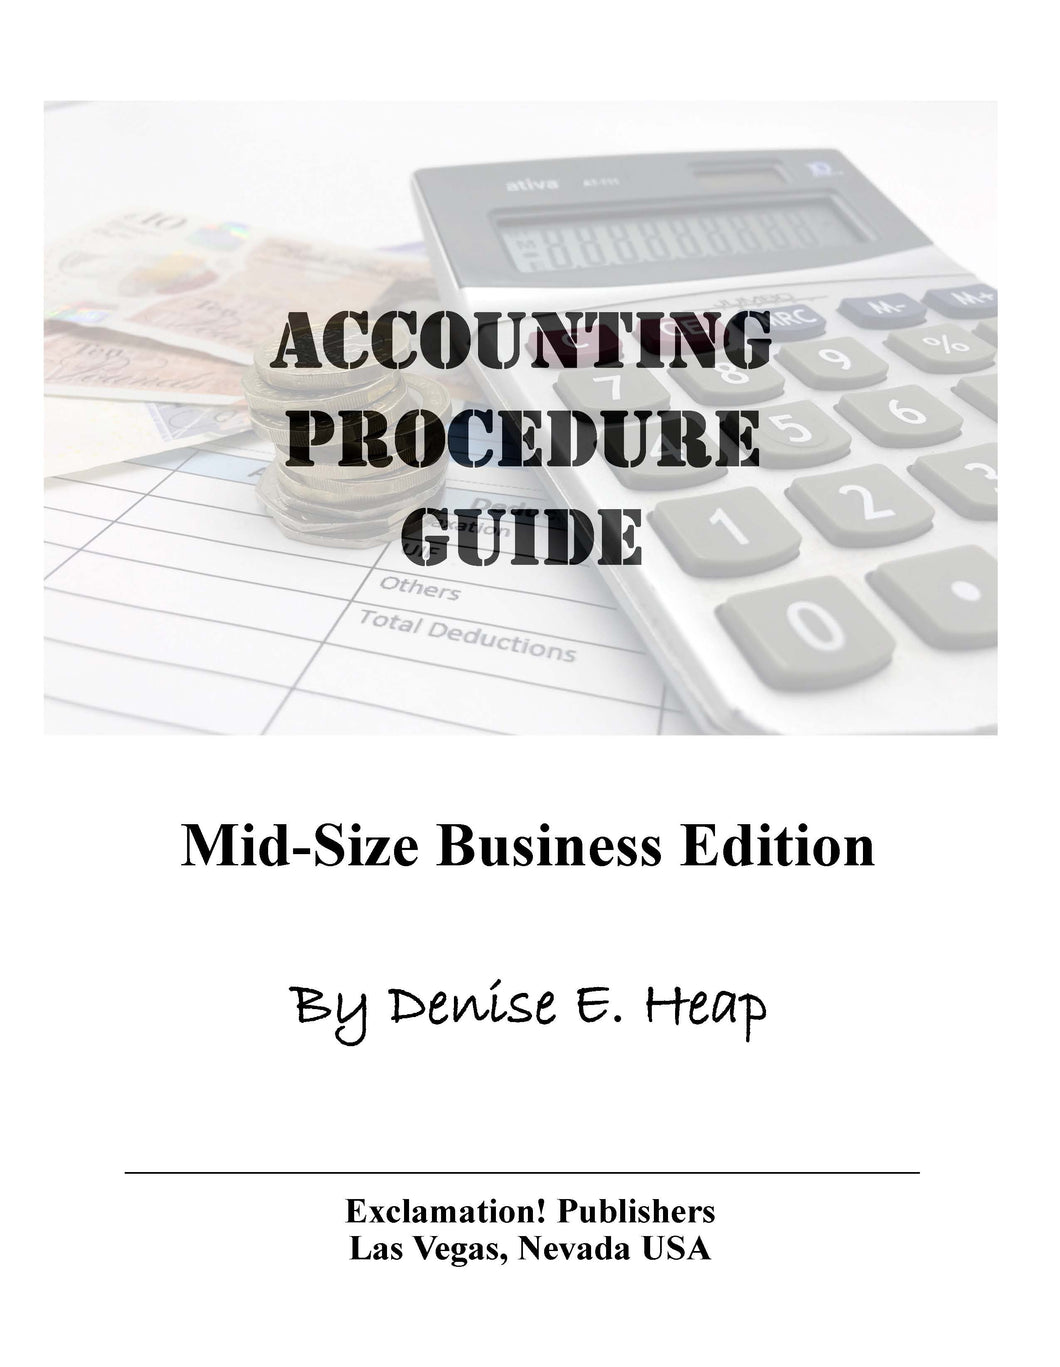 Accounting procedure guide. For mid-size businesses.